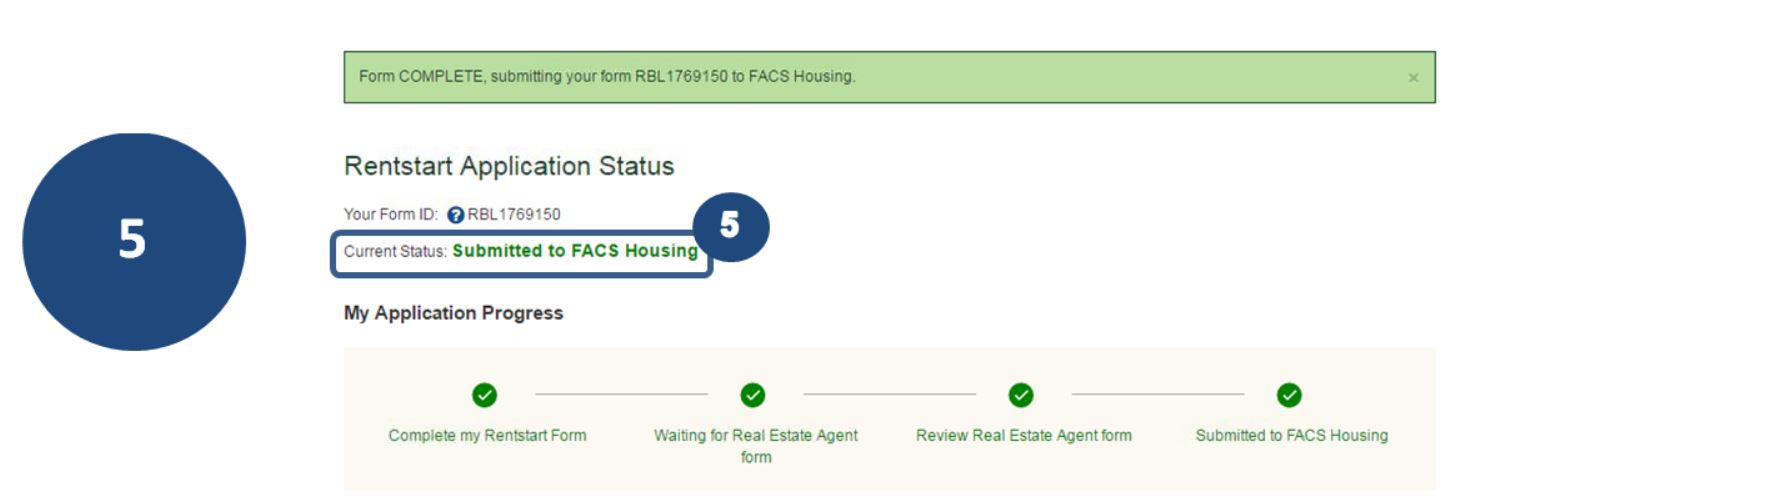 5. Once submitted, the status shows the application has been successfully submitted to FACS Housing.